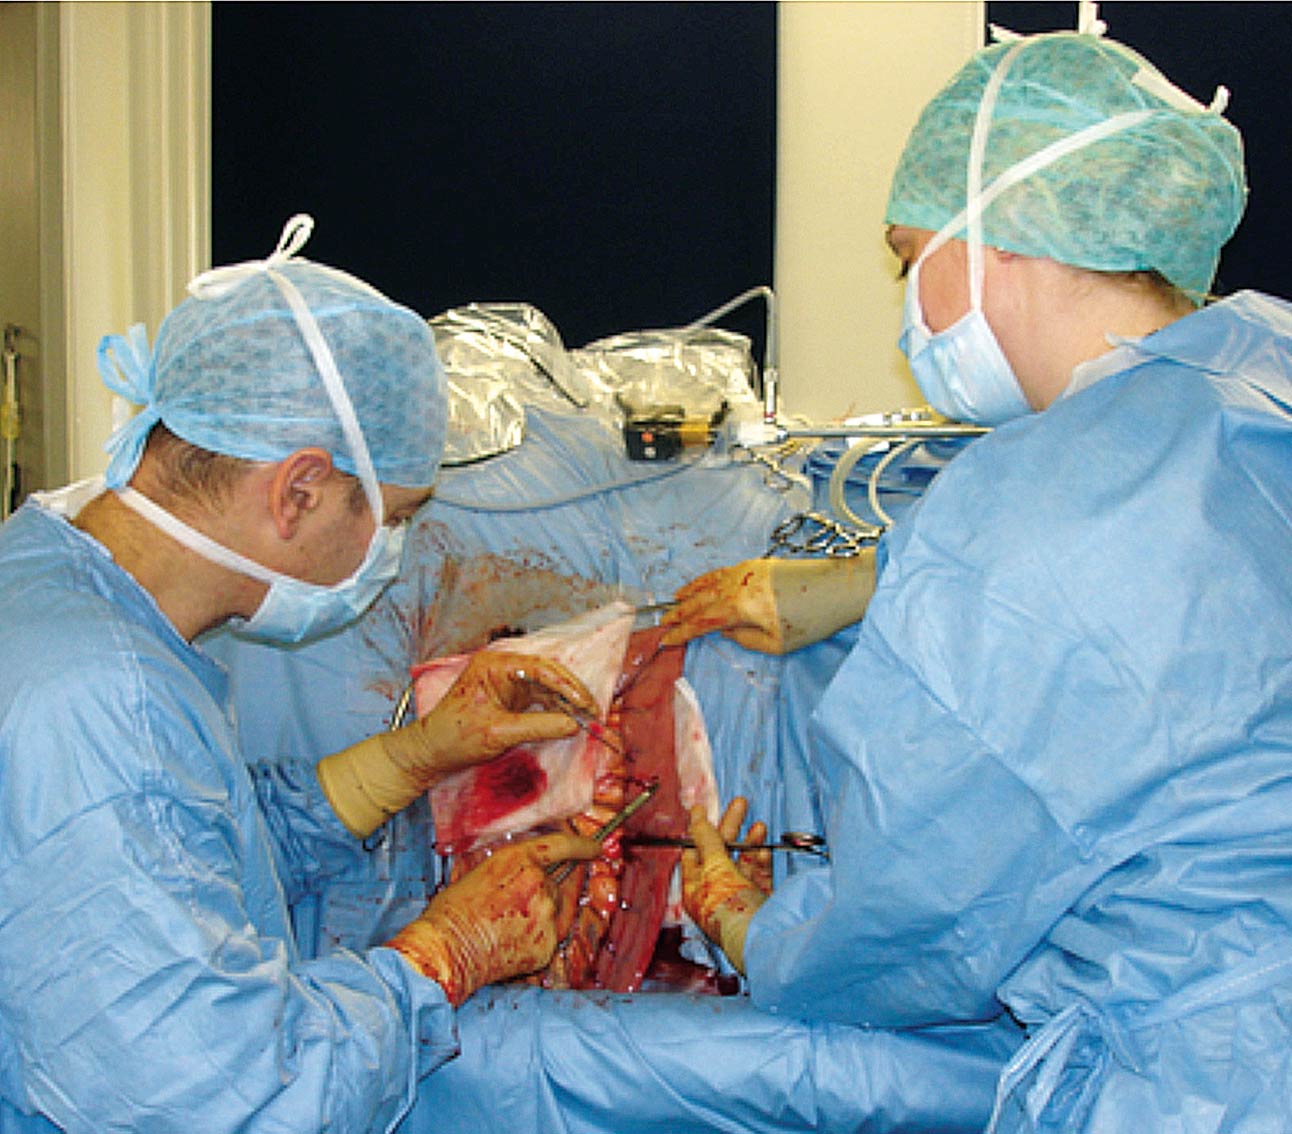 Figure 4. Laparoscopic-assisted flank laparotomy to biopsy small intestine. Image: Dylan Gorvy and Laura Hirvinen/Strömsholm Equine Referral Hospital.